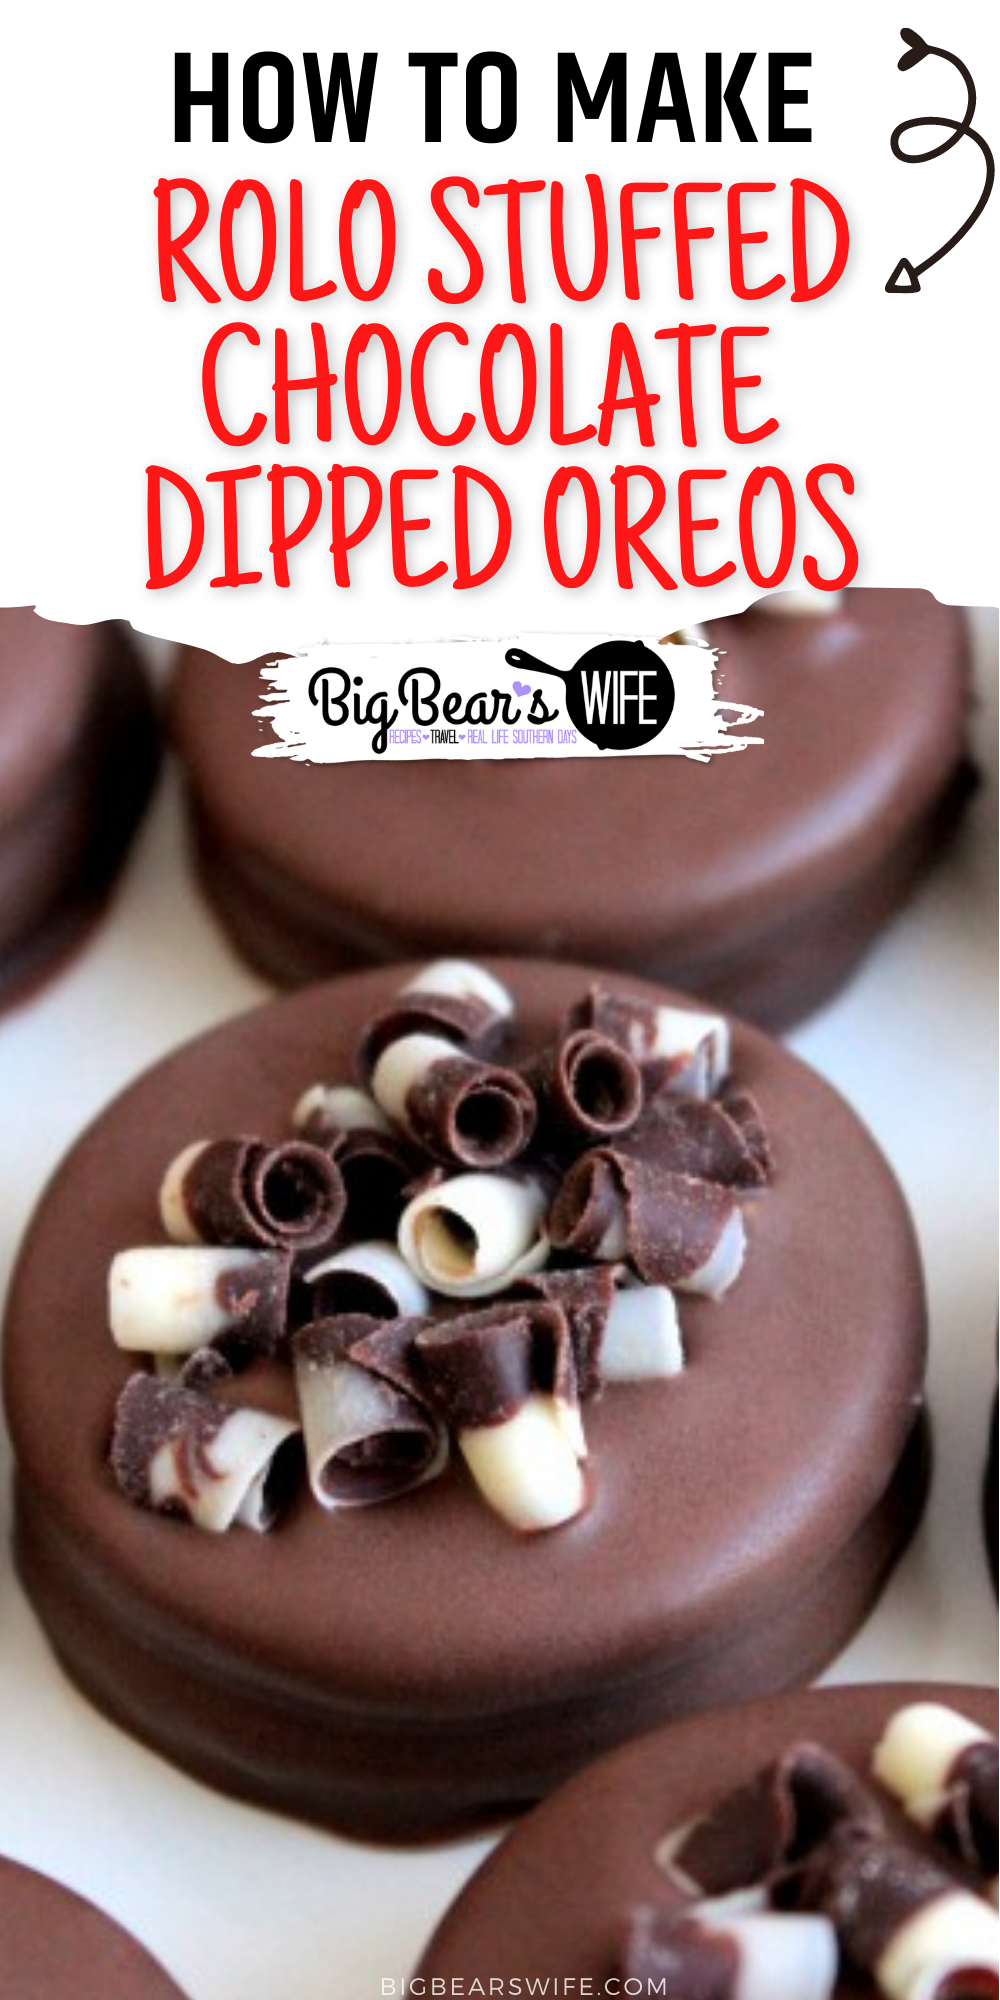 These super easy Rolo Stuffed Chocolate Dipped Oreos are perfect for holiday parties, homemade gifts or just as a sweet treat to have around the house!  via @bigbearswife